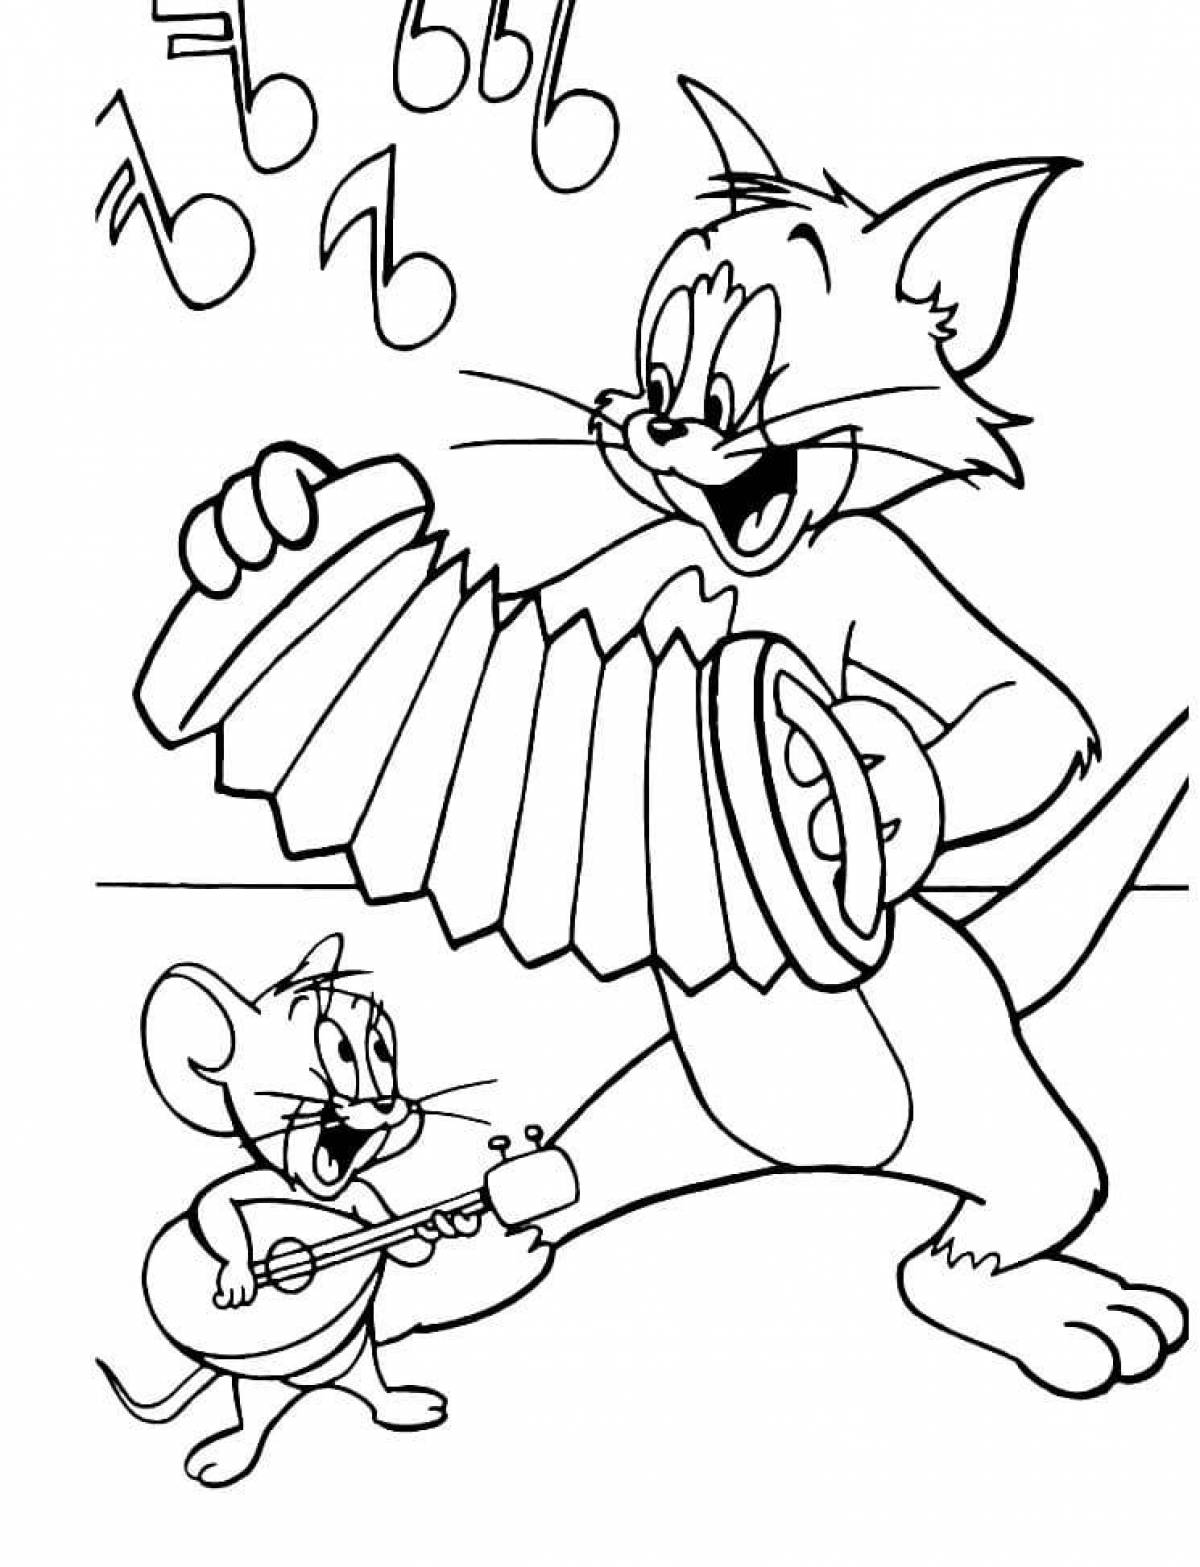 Perfect tom and jerry coloring book for kids